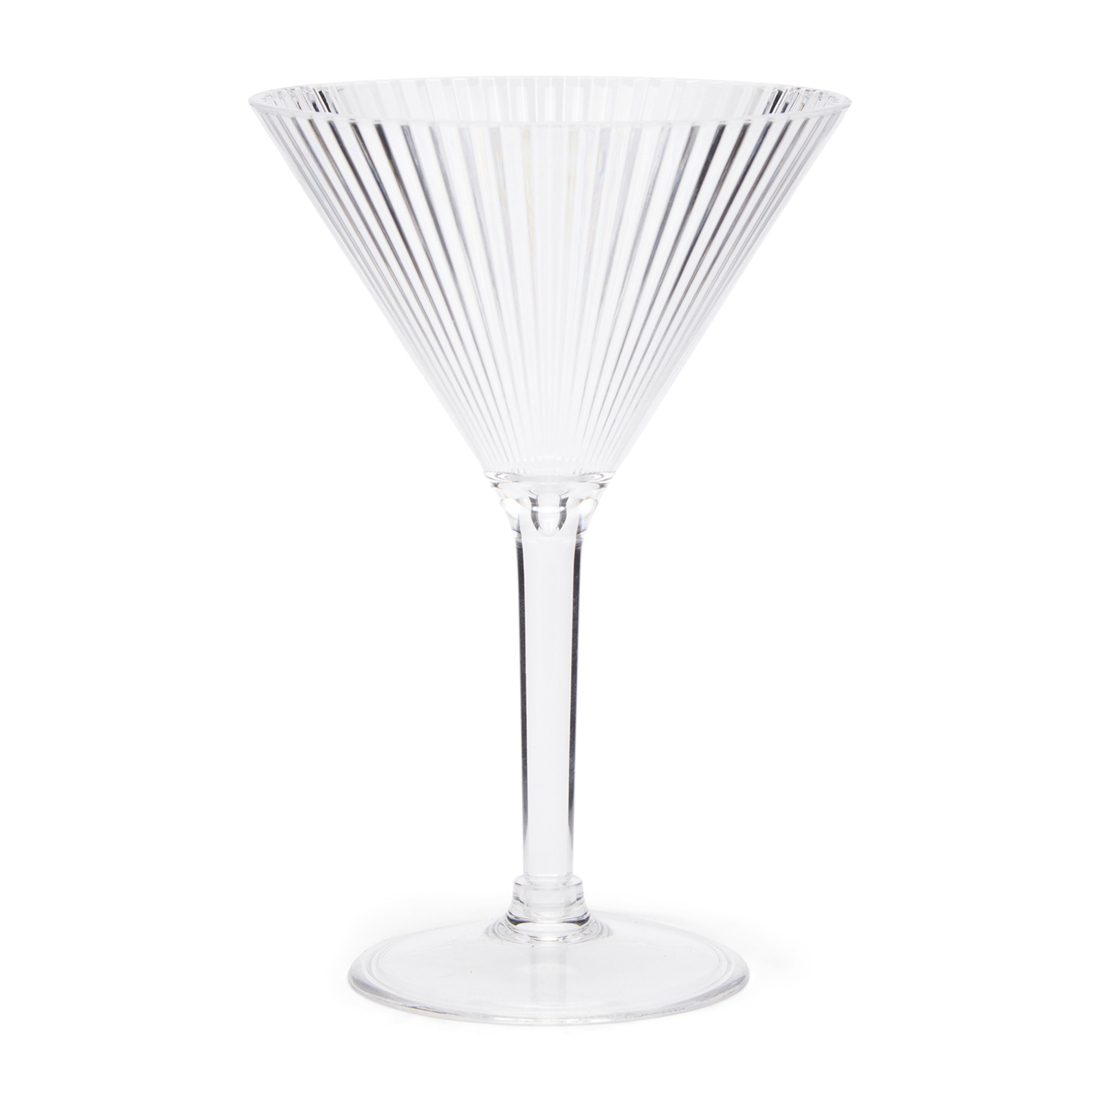 Riviera Maison RM Live For Summer Cocktail Glass  - Ms - 12.0x12.0x18.0 cm